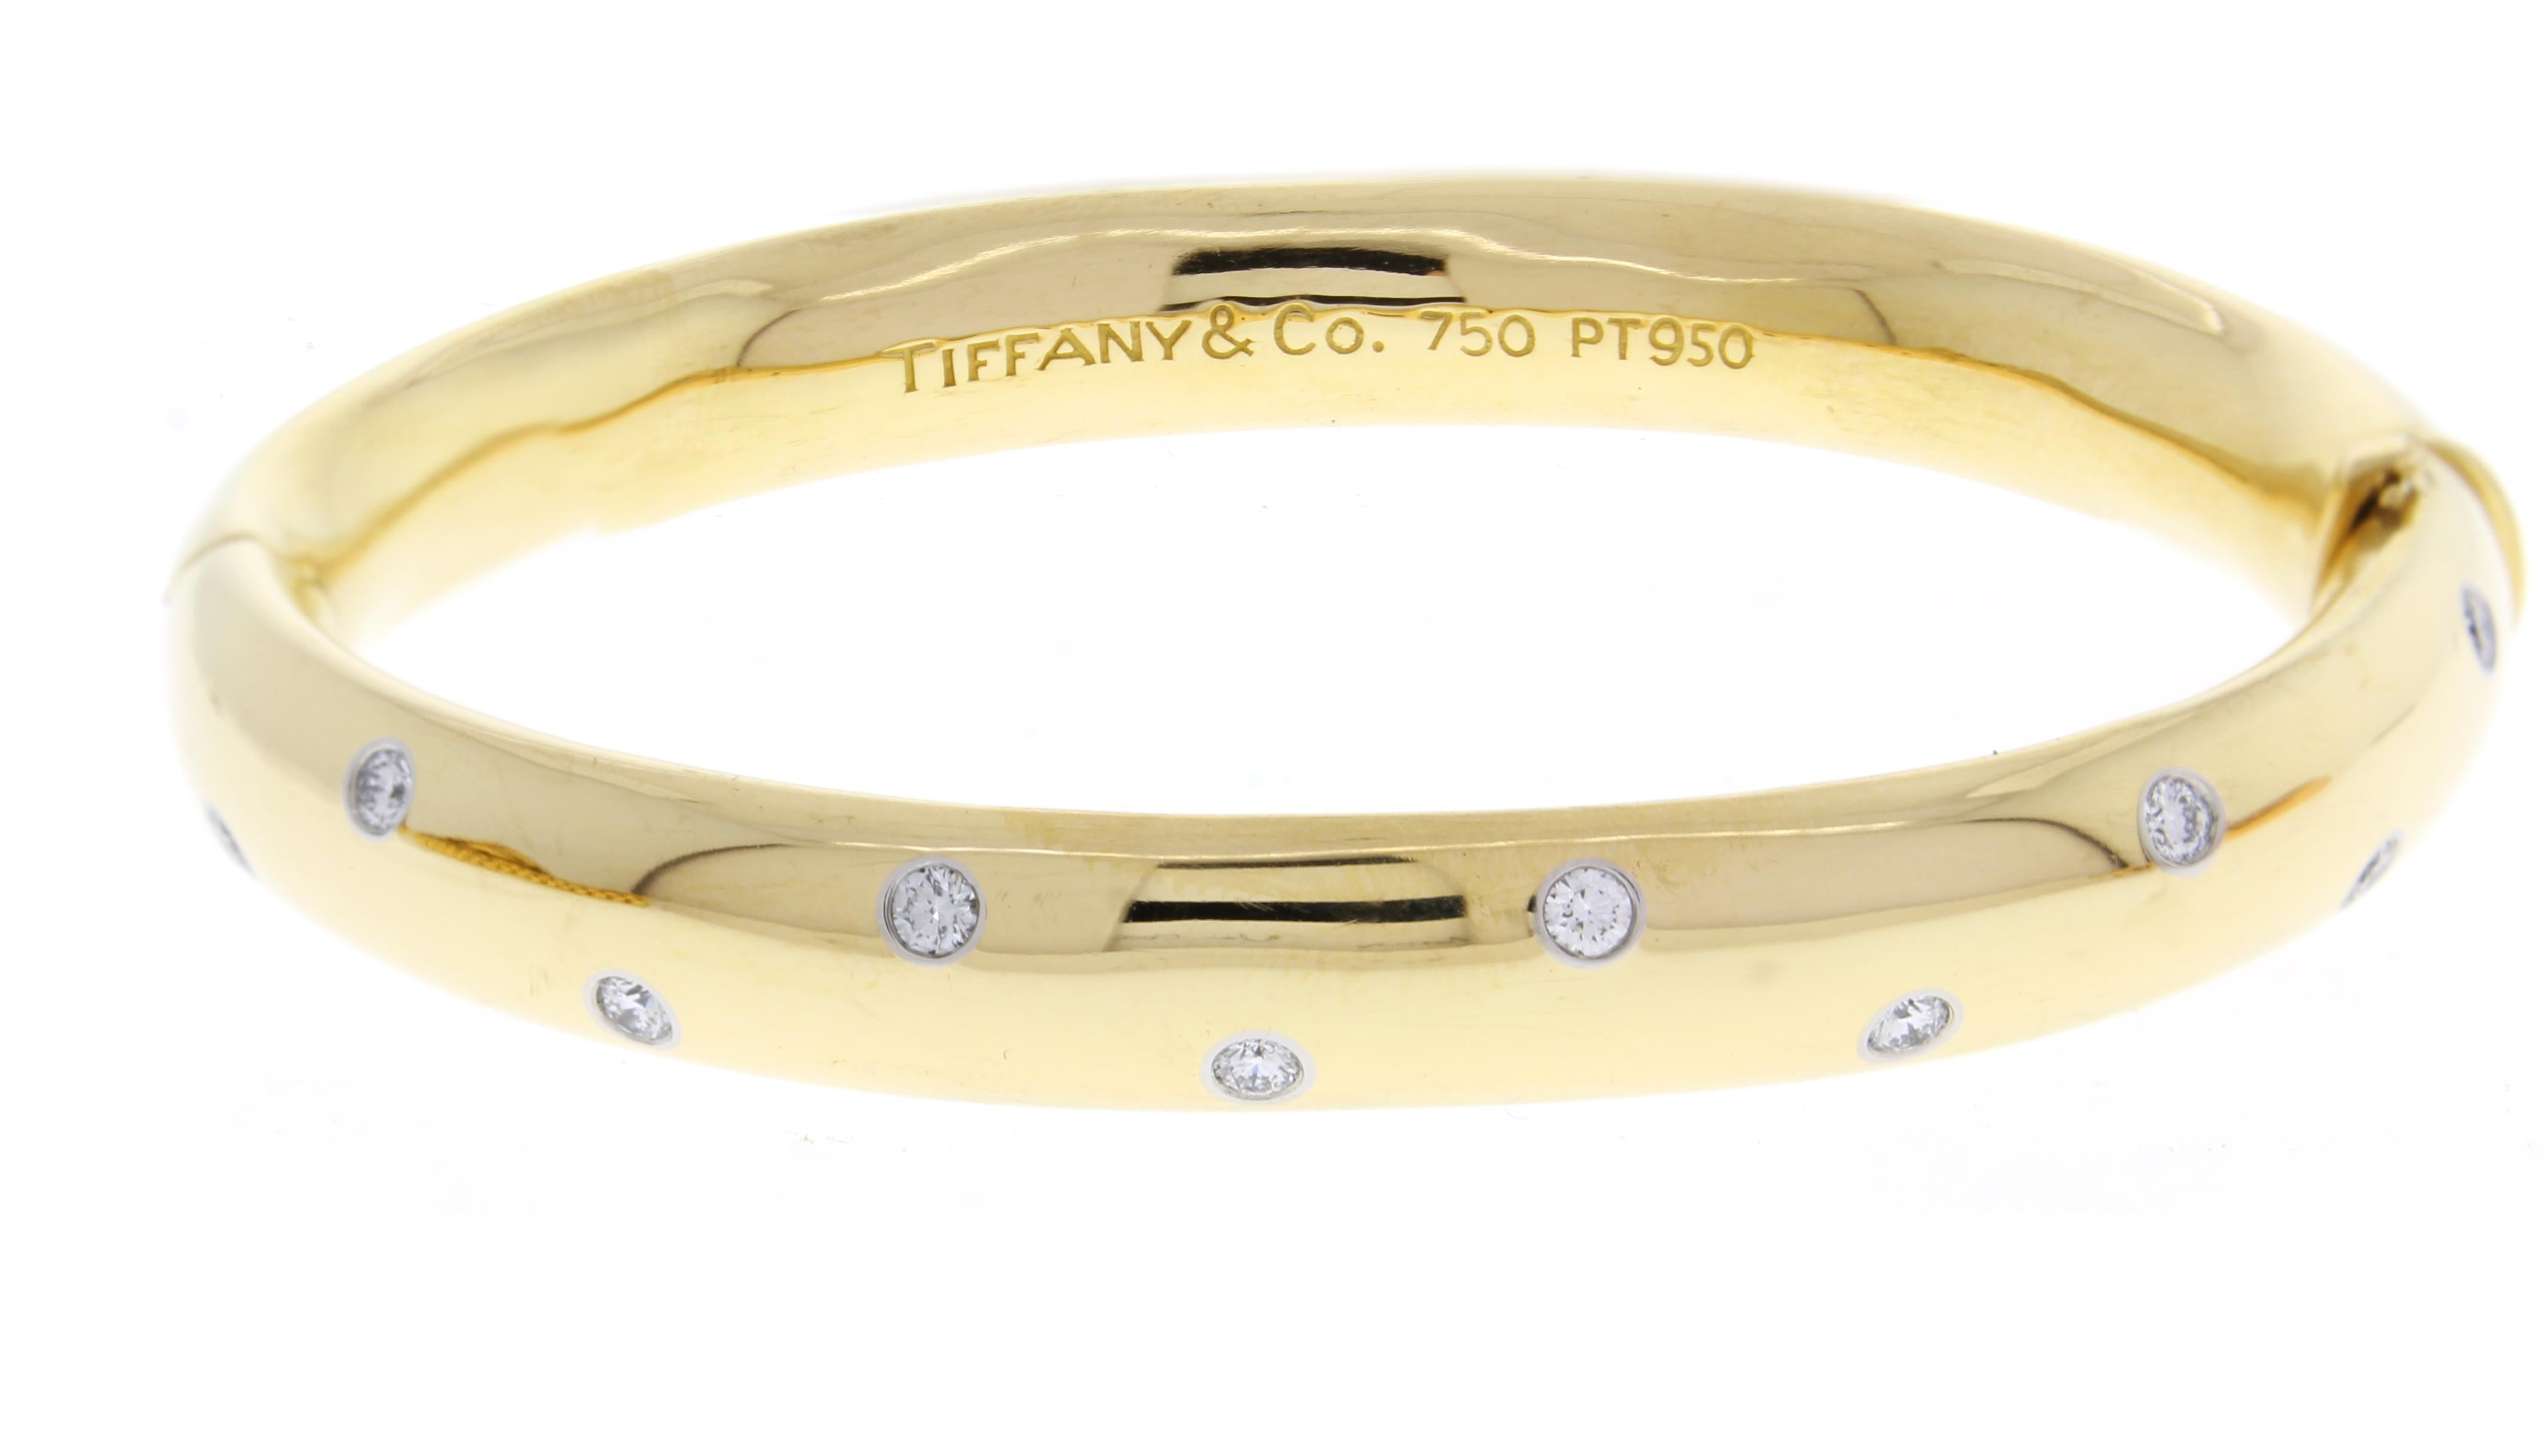 From Tiffany & Co.'s Etoile collect, their wide diamond Etoile bangle
♦ Designer: Tiffany & Co.
♦ Metal: 18 karat and platinum
♦ 10 brilliant diamonds=.50 carats, set in platinum
♦ Circa 2000
♦ Size Medium, 10mm wide
♦ Size 63 gram 
♦ Packaging: